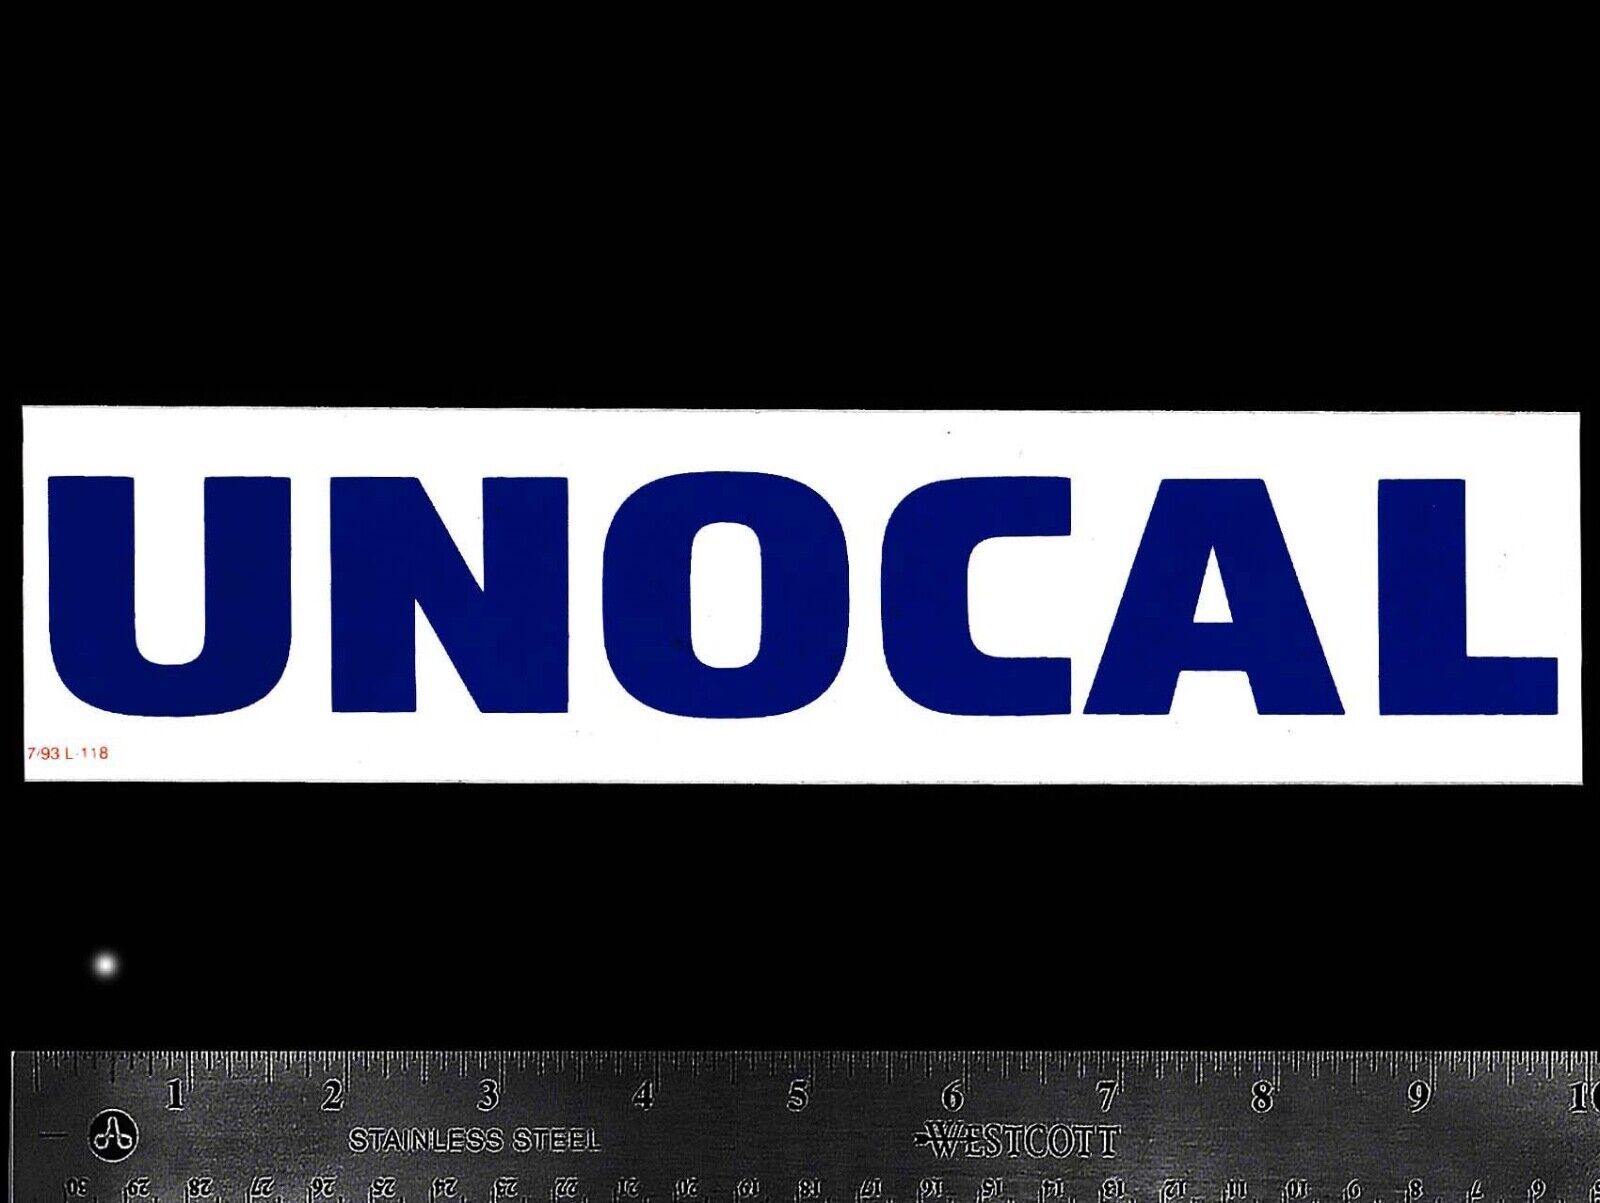 UNOCAL 76 - Original Vintage 70's 80’s Racing Decal/Sticker - Union Oil Company